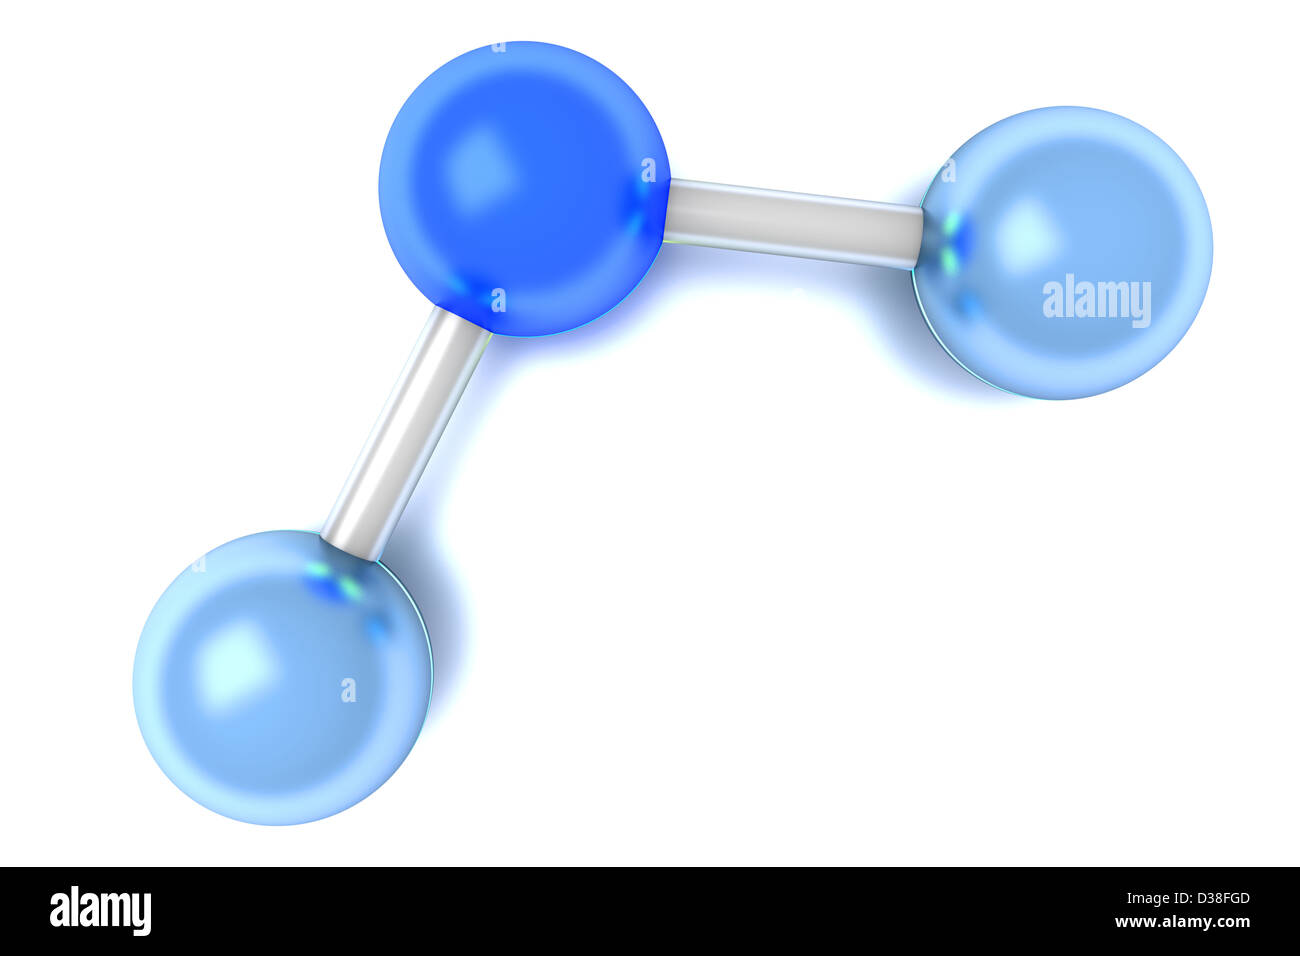 A H2O - Water Molecule. 3D rendered Illustration. Stock Photo